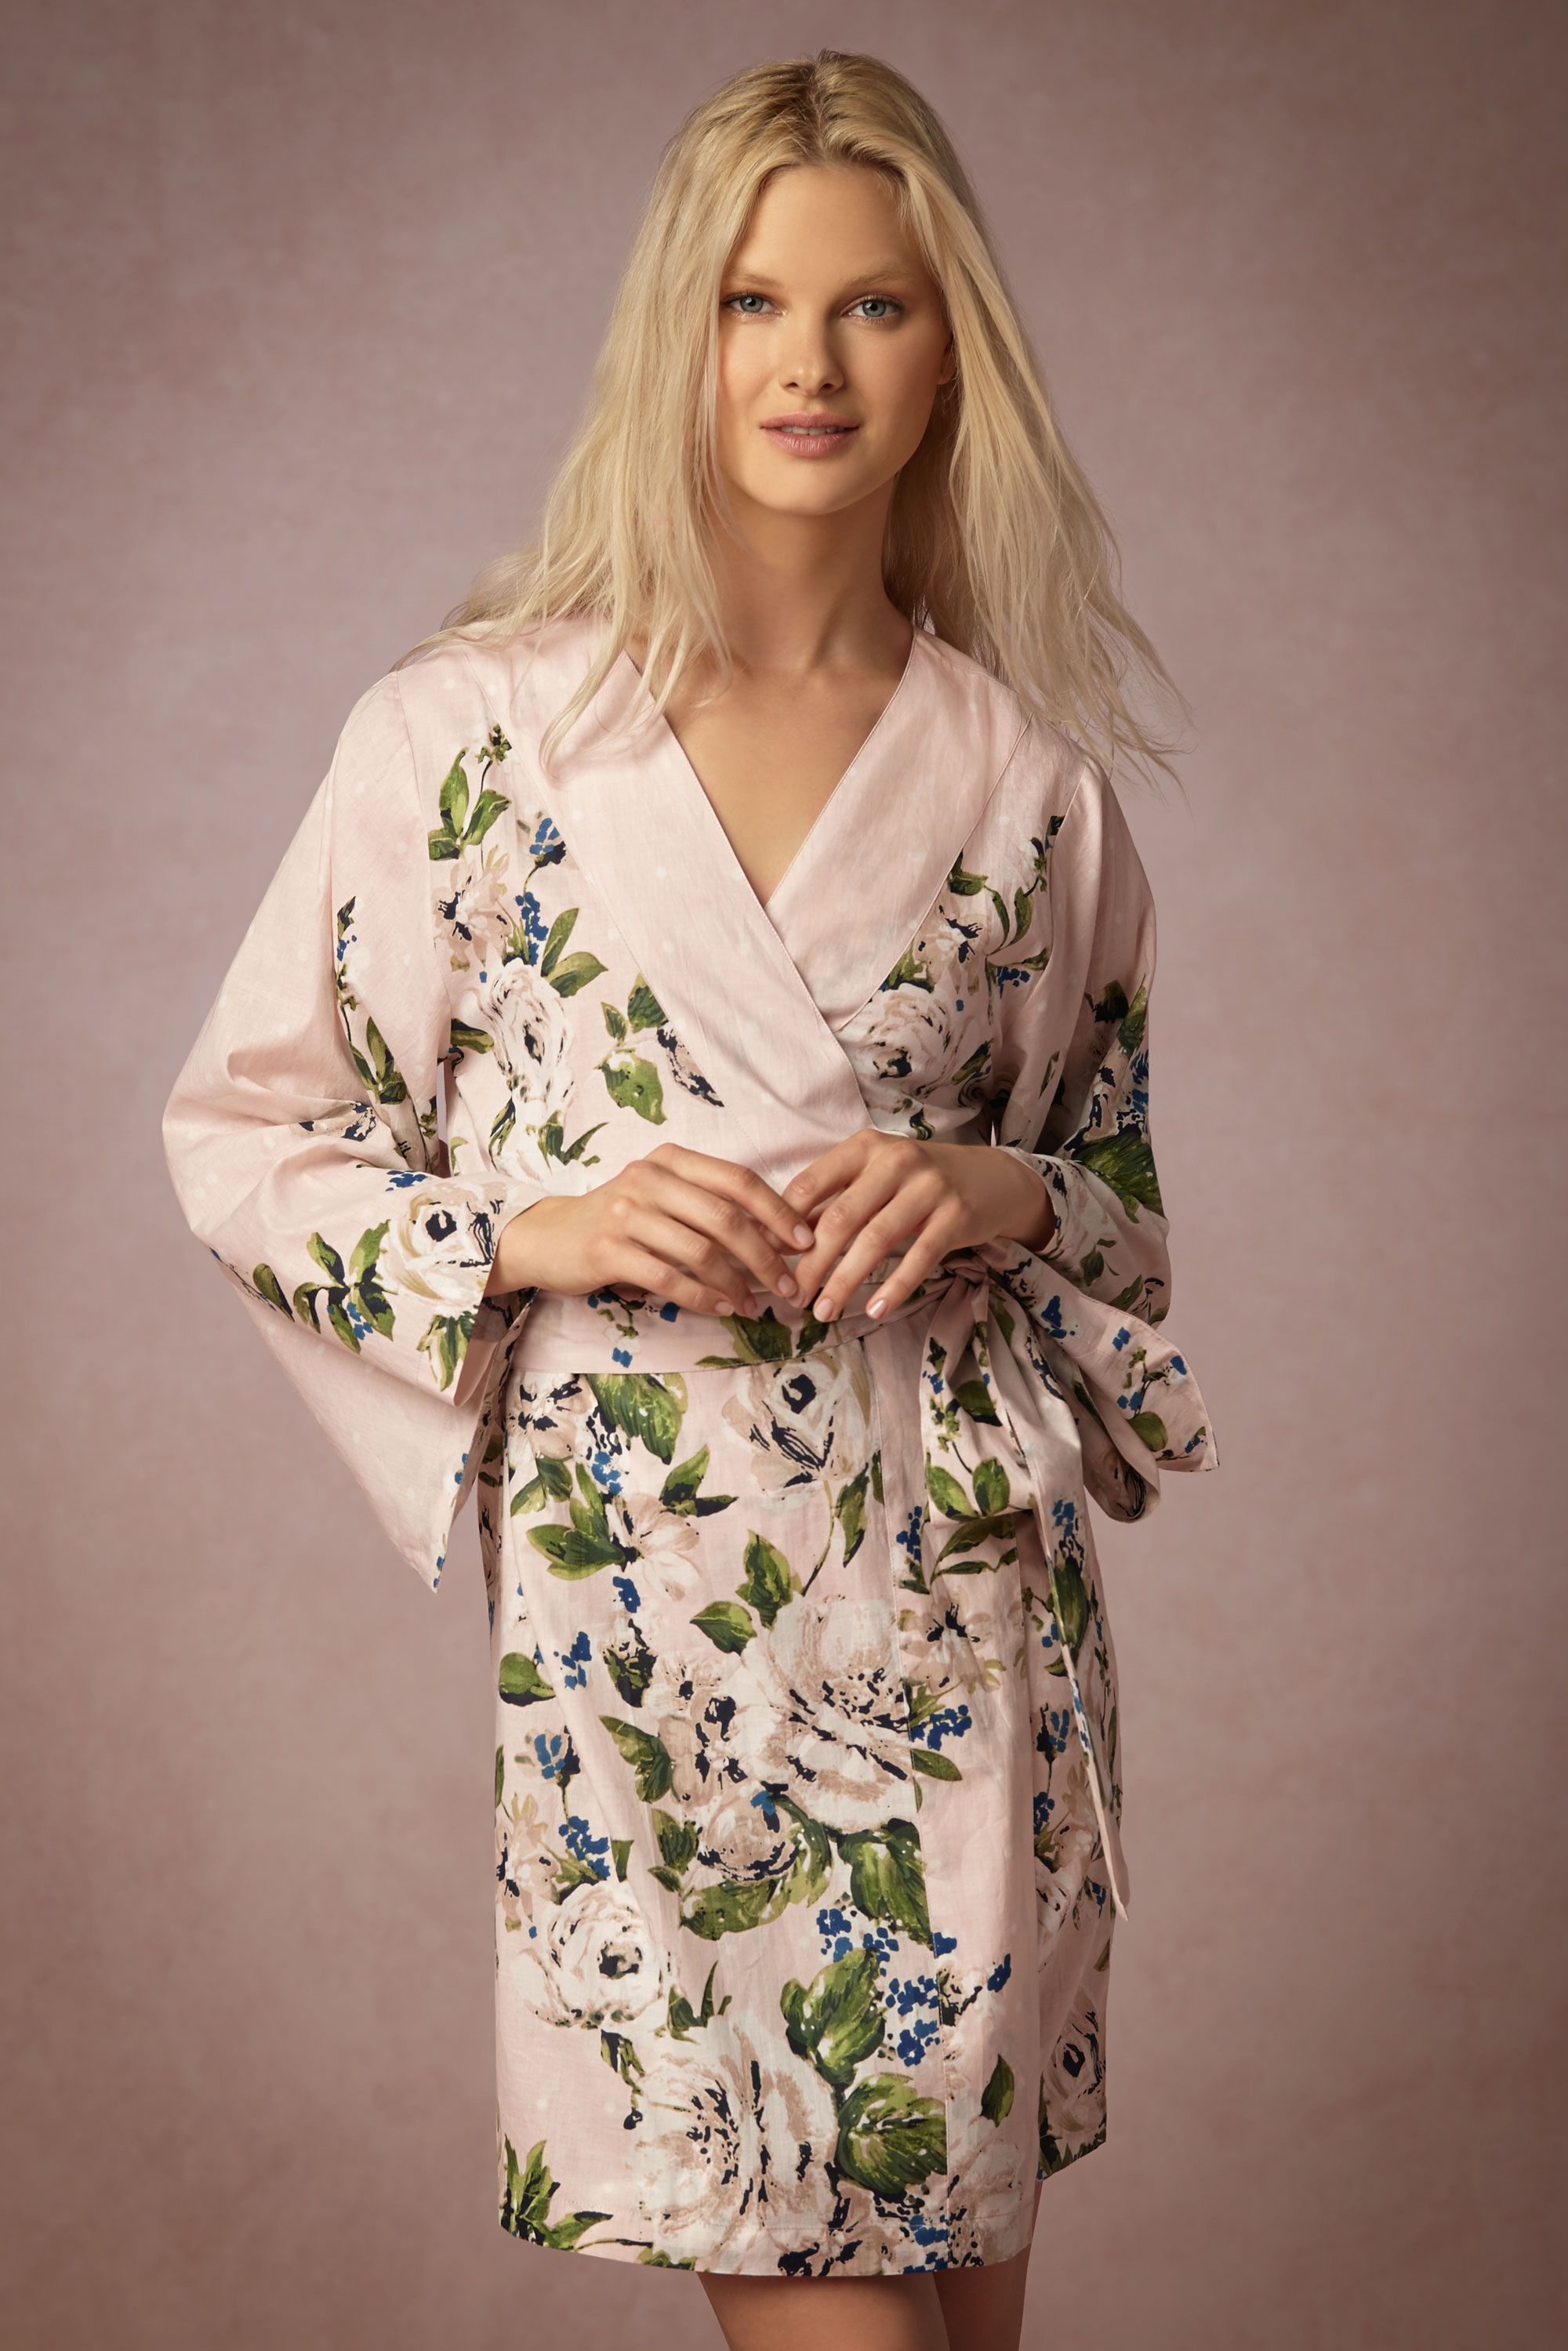 Gift Guide for the bride-to-be - painted petal floral robe